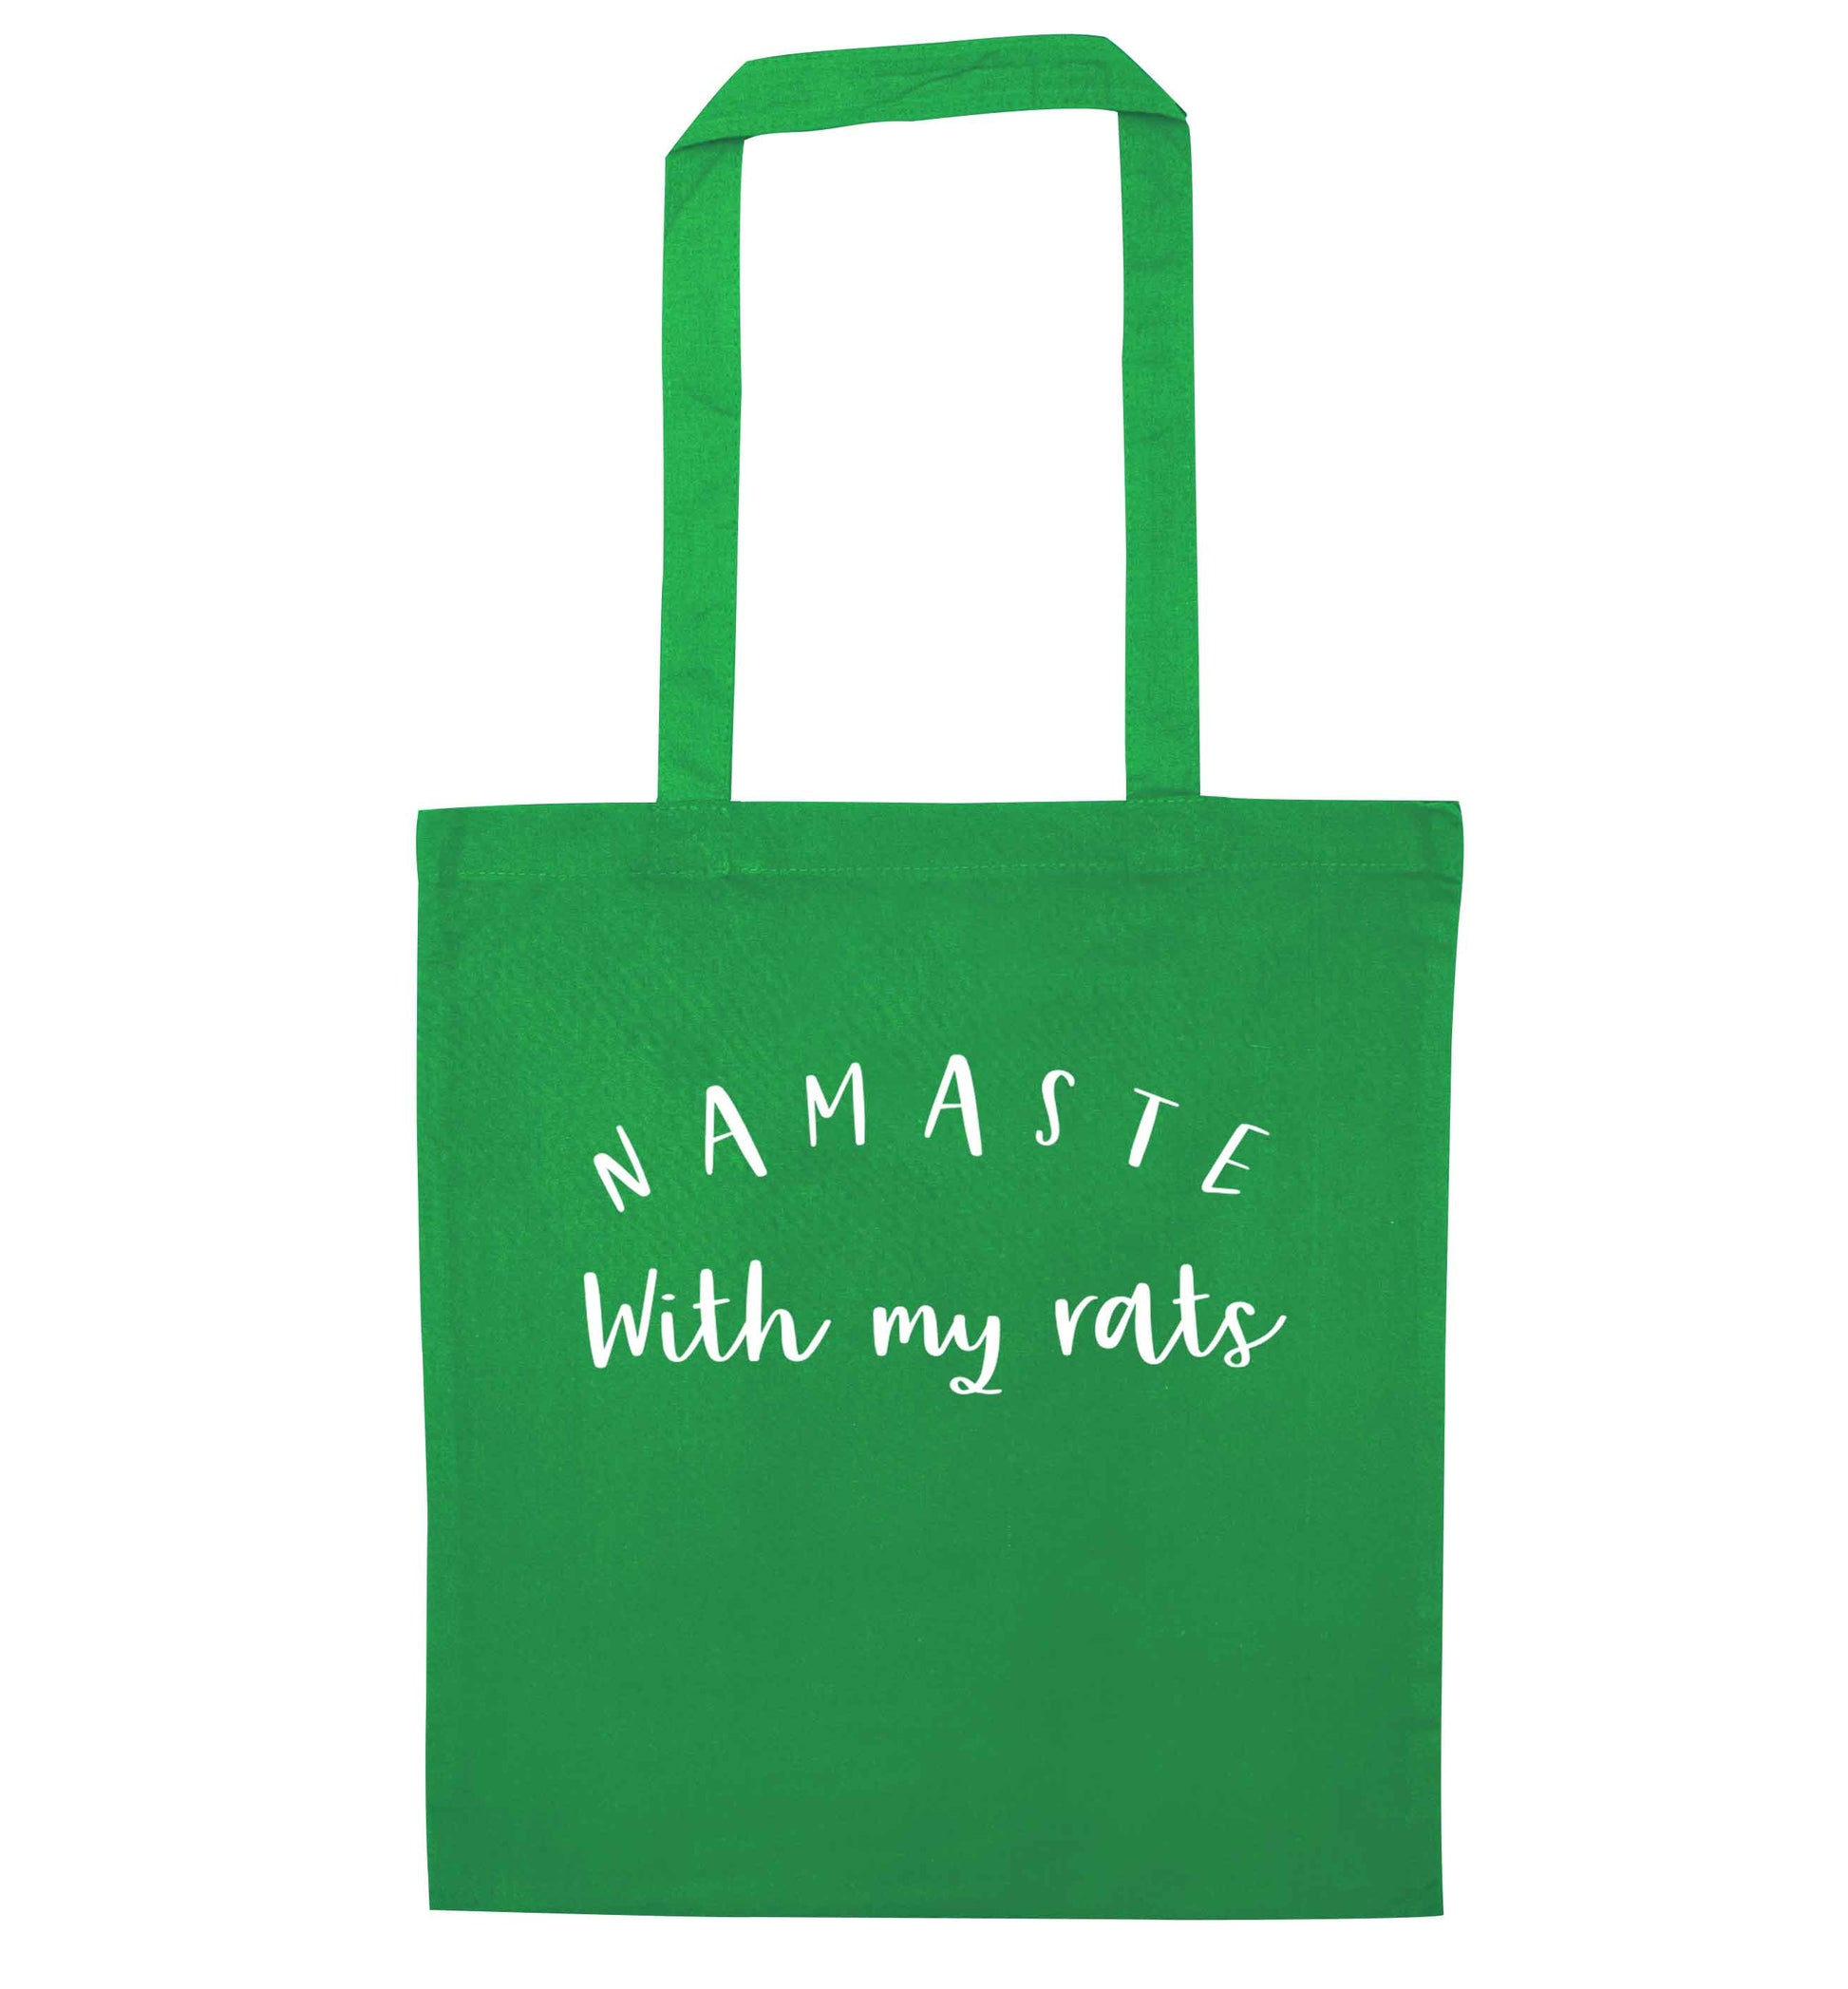 Namaste with my rats green tote bag